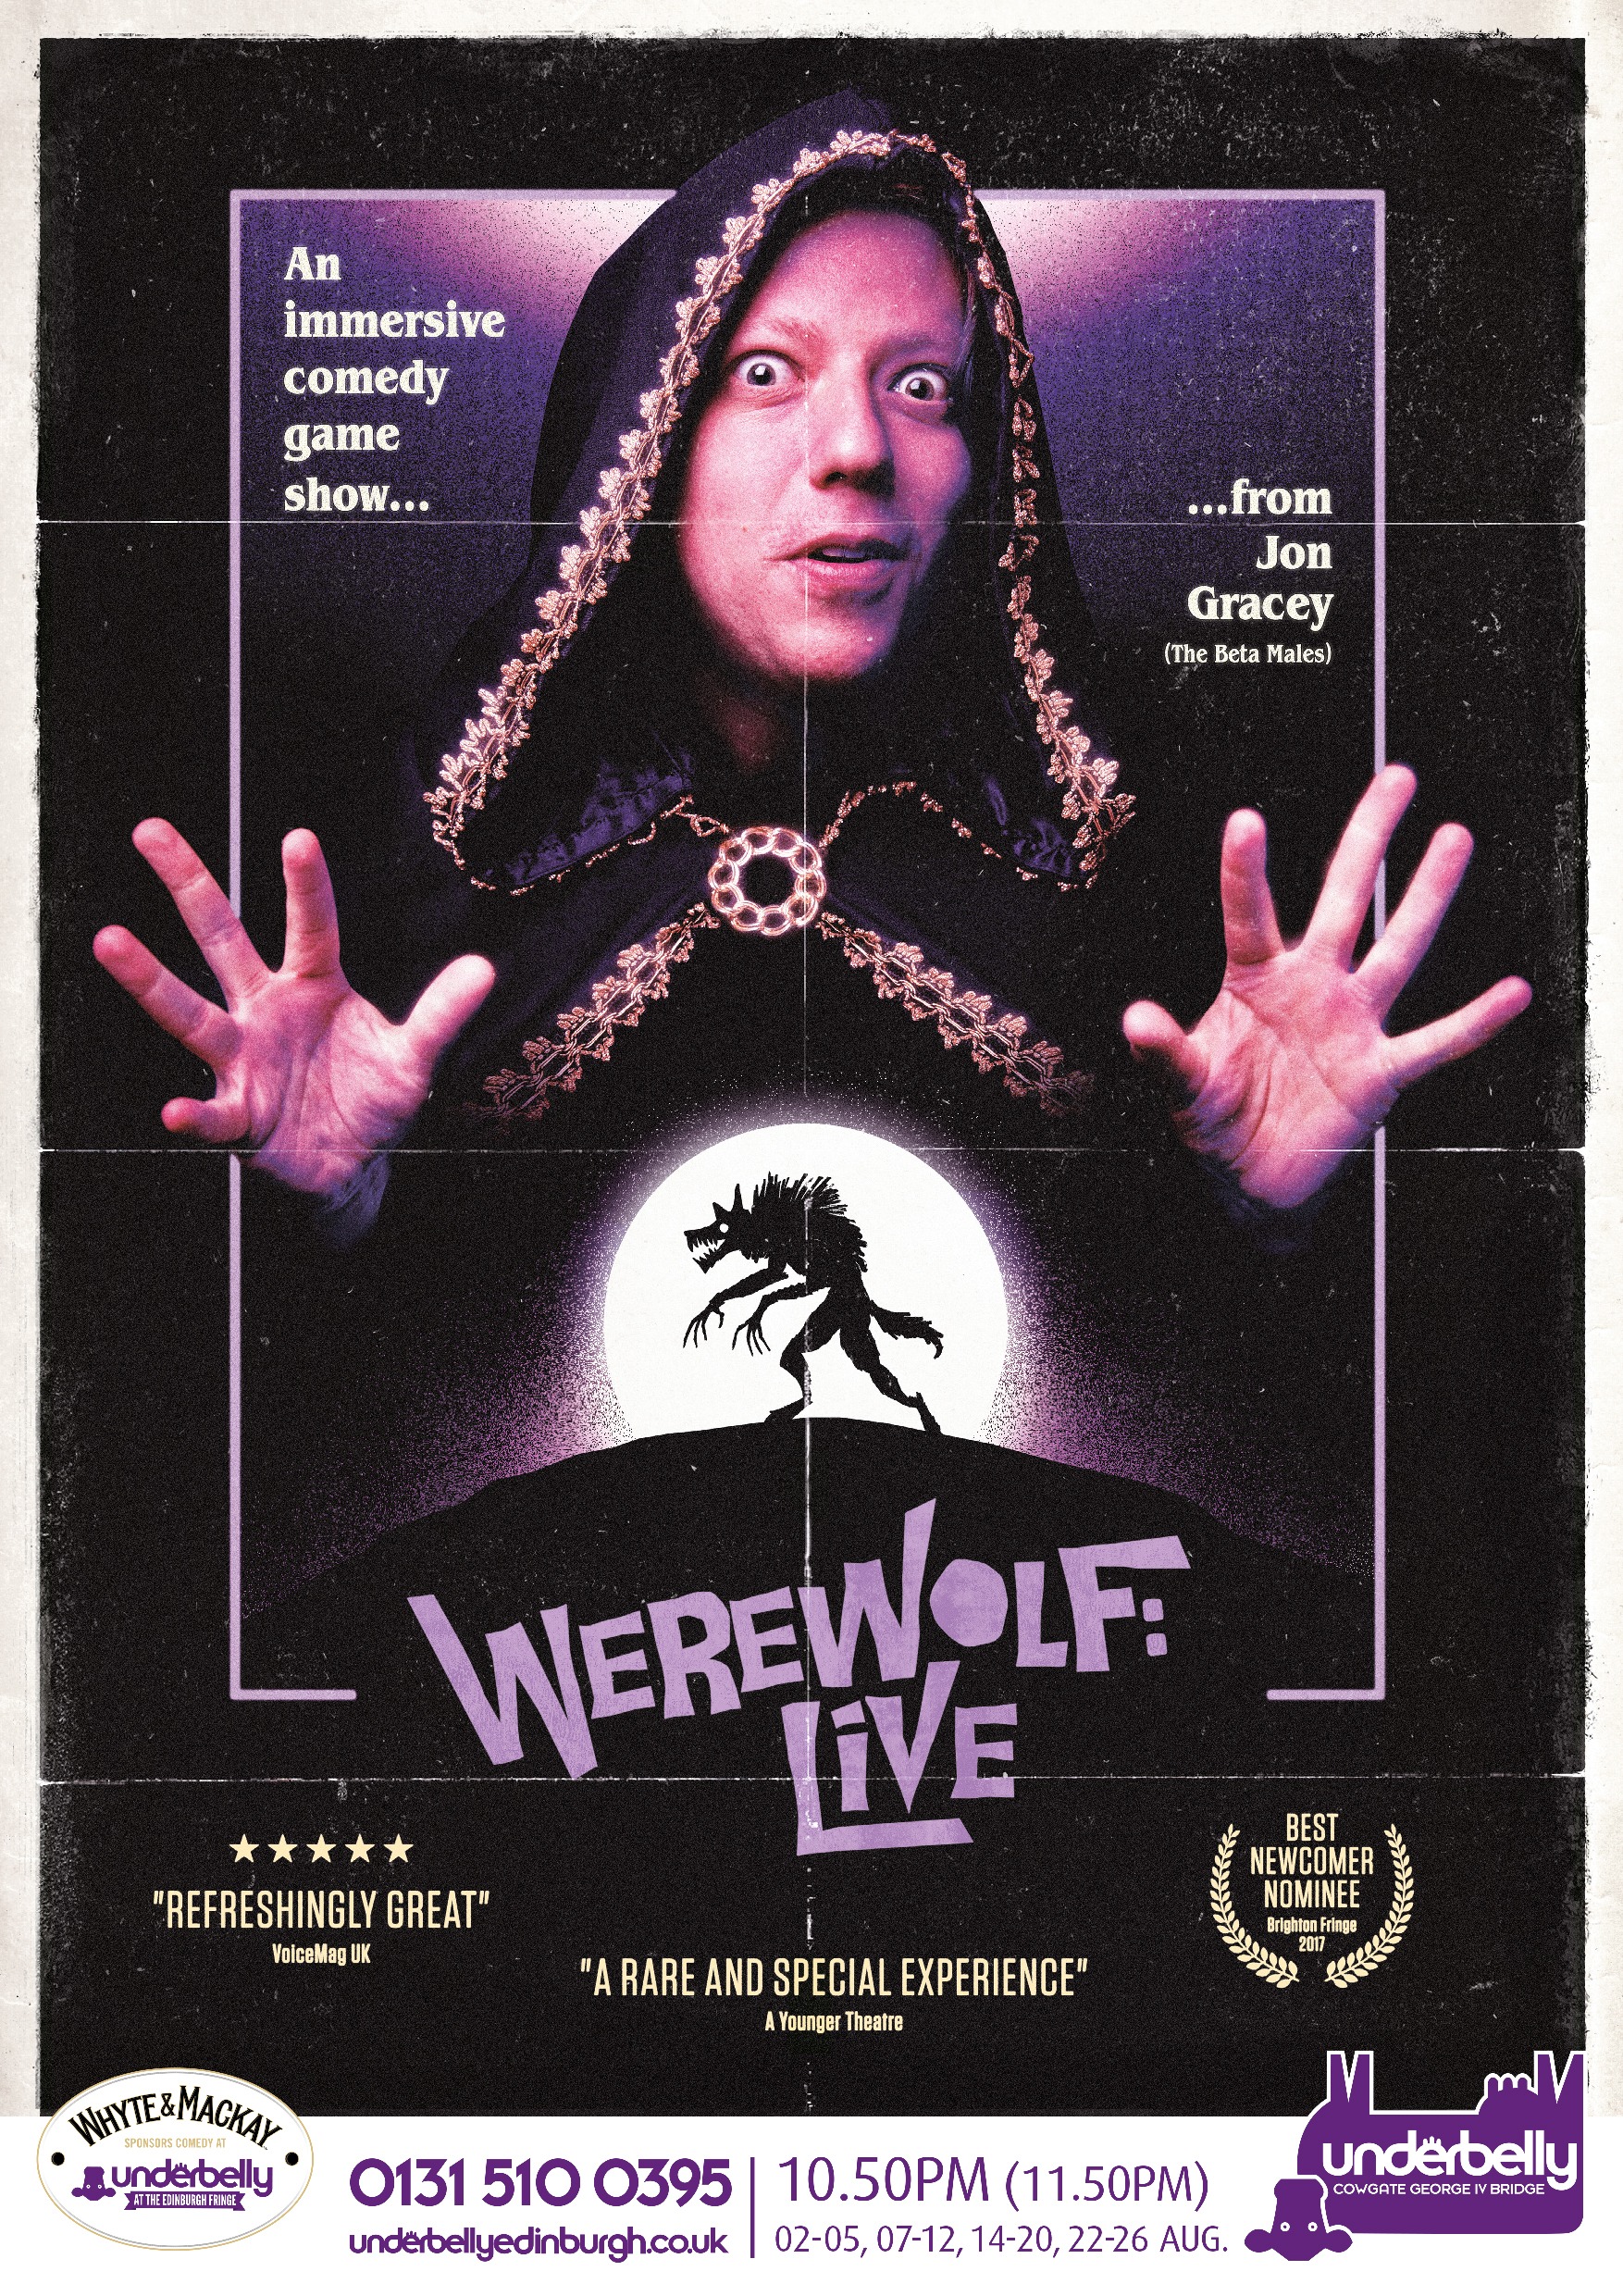 The poster for Werewolf: Live